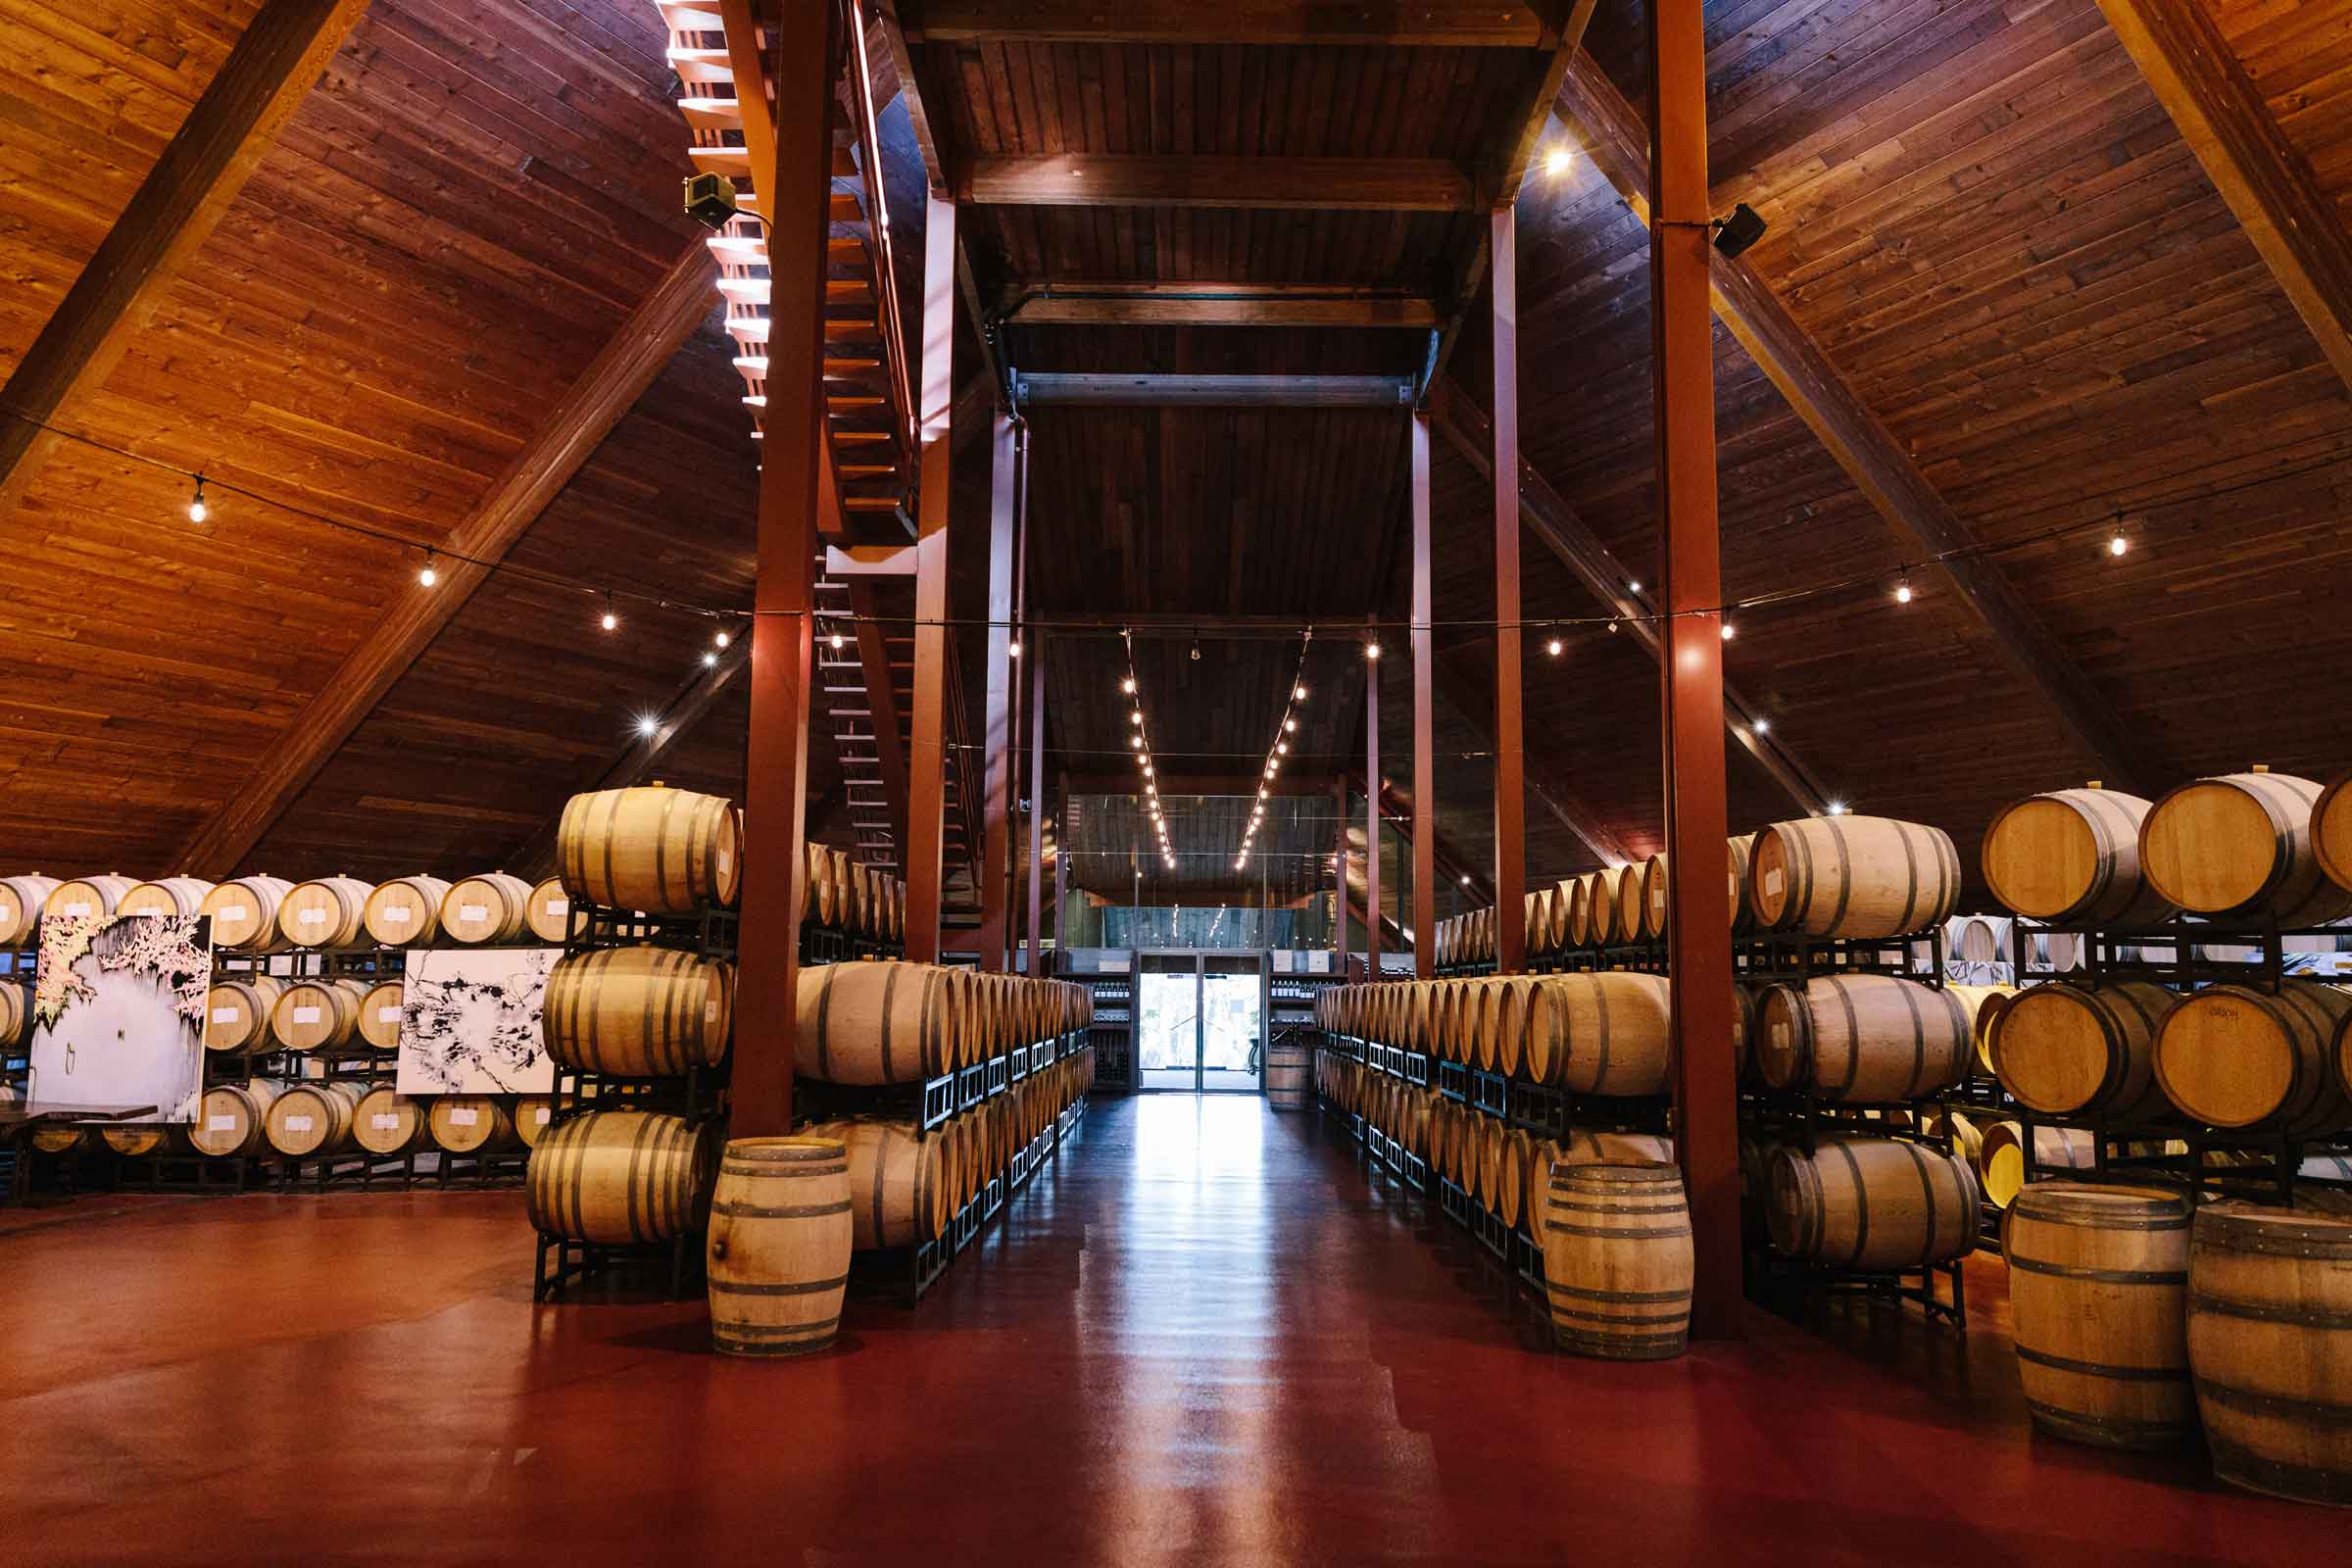 A photo of the interior of the Chappellet winery